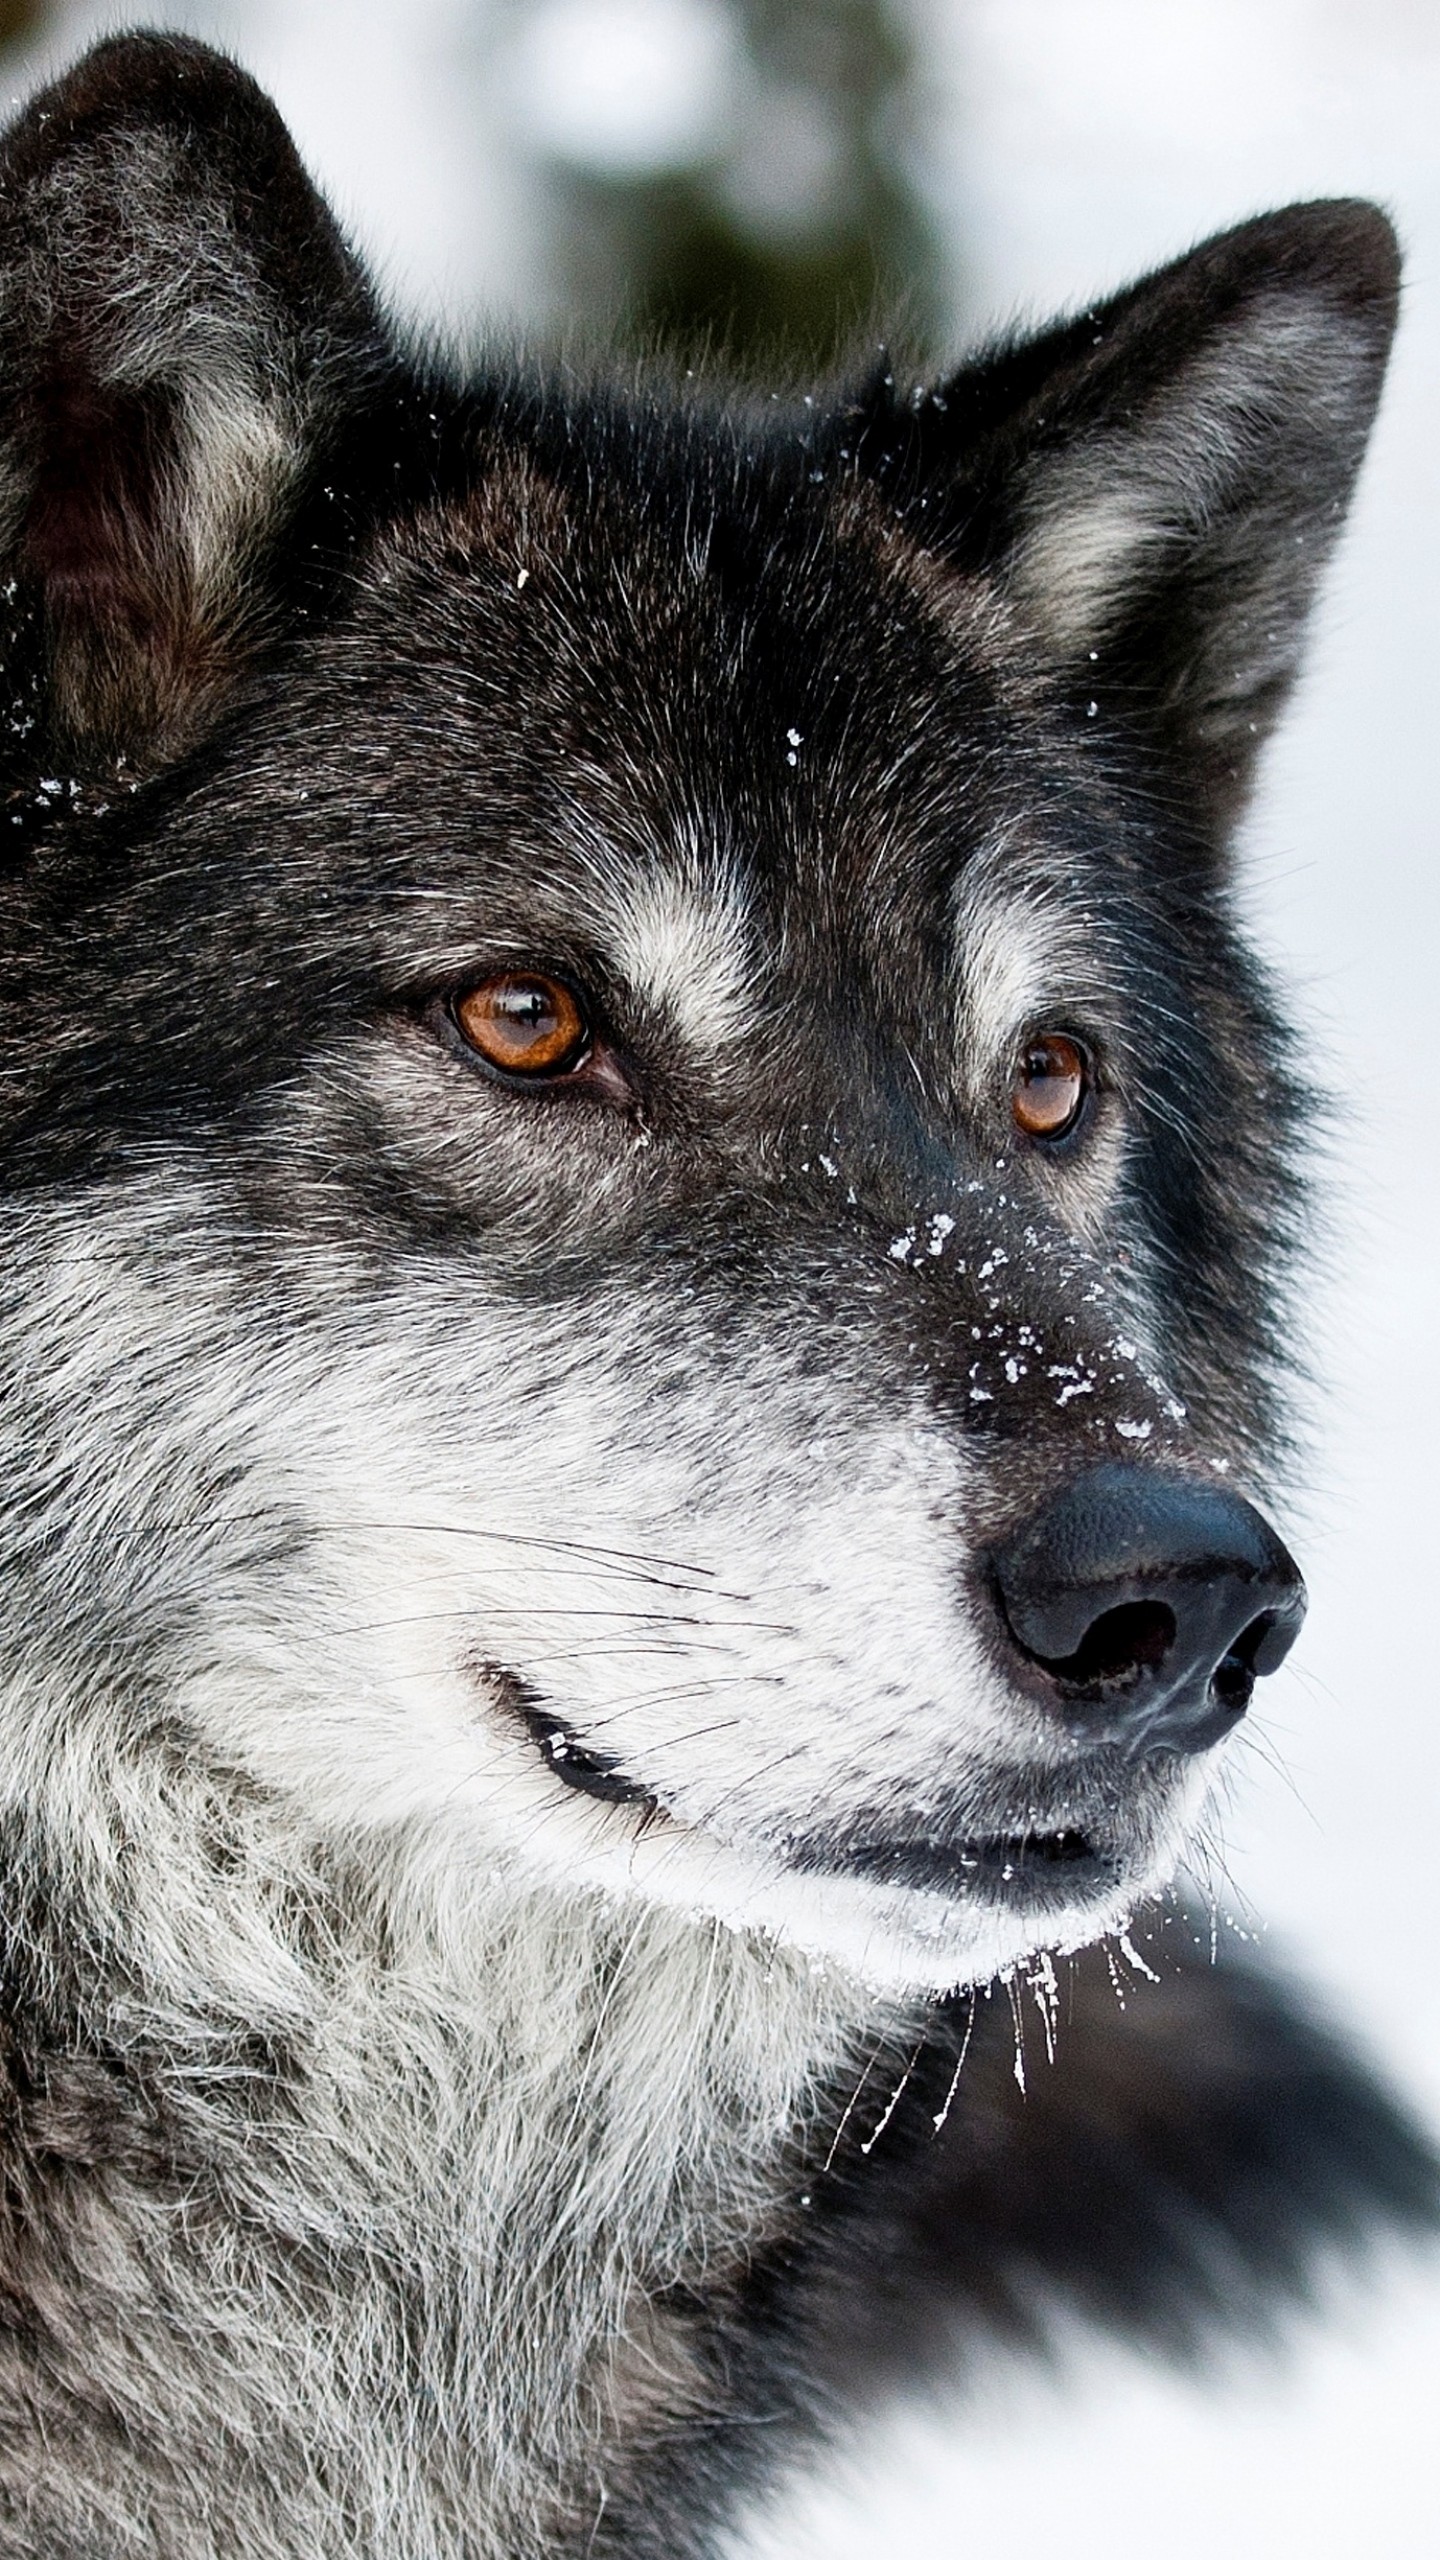 Cool Wolf Photo Galaxy : Galaxy Wolf Wallpaper (69+ images) - Image of